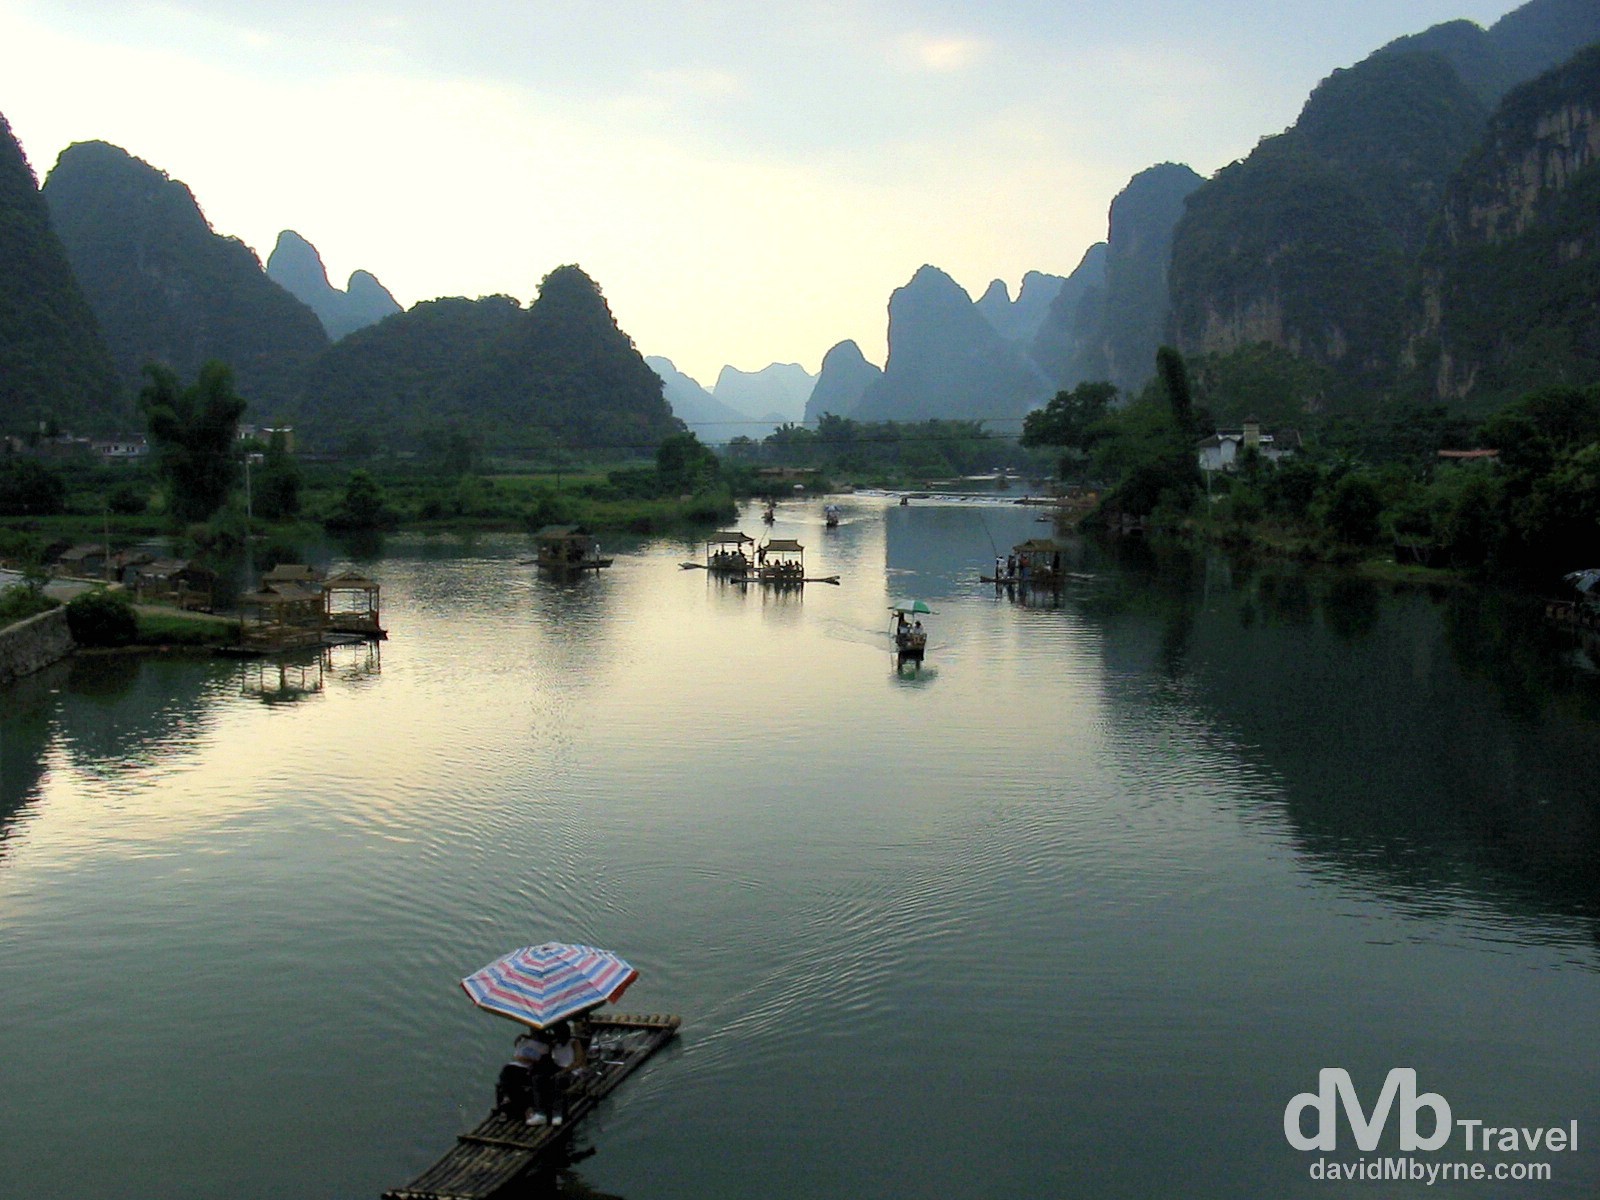 Getting punted near sunset on a section of the Li River outside Yangshuo, Guangxi Province, Southern China. September 11th, 2004.